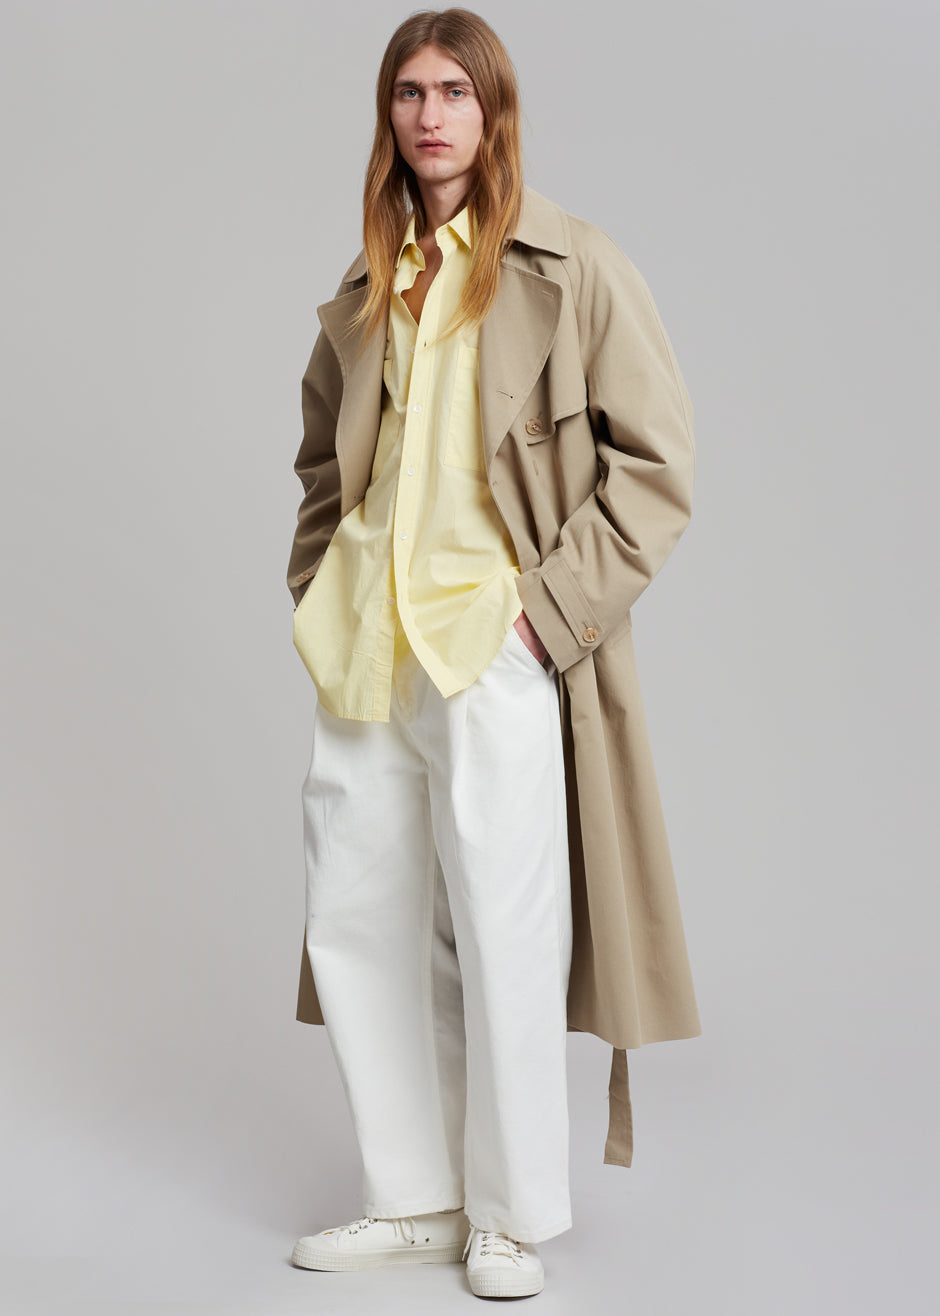 Umi Belted Trench Coat - Beige - 12 - Umi Belted Trench Coat - Beige Coat [gender-male]